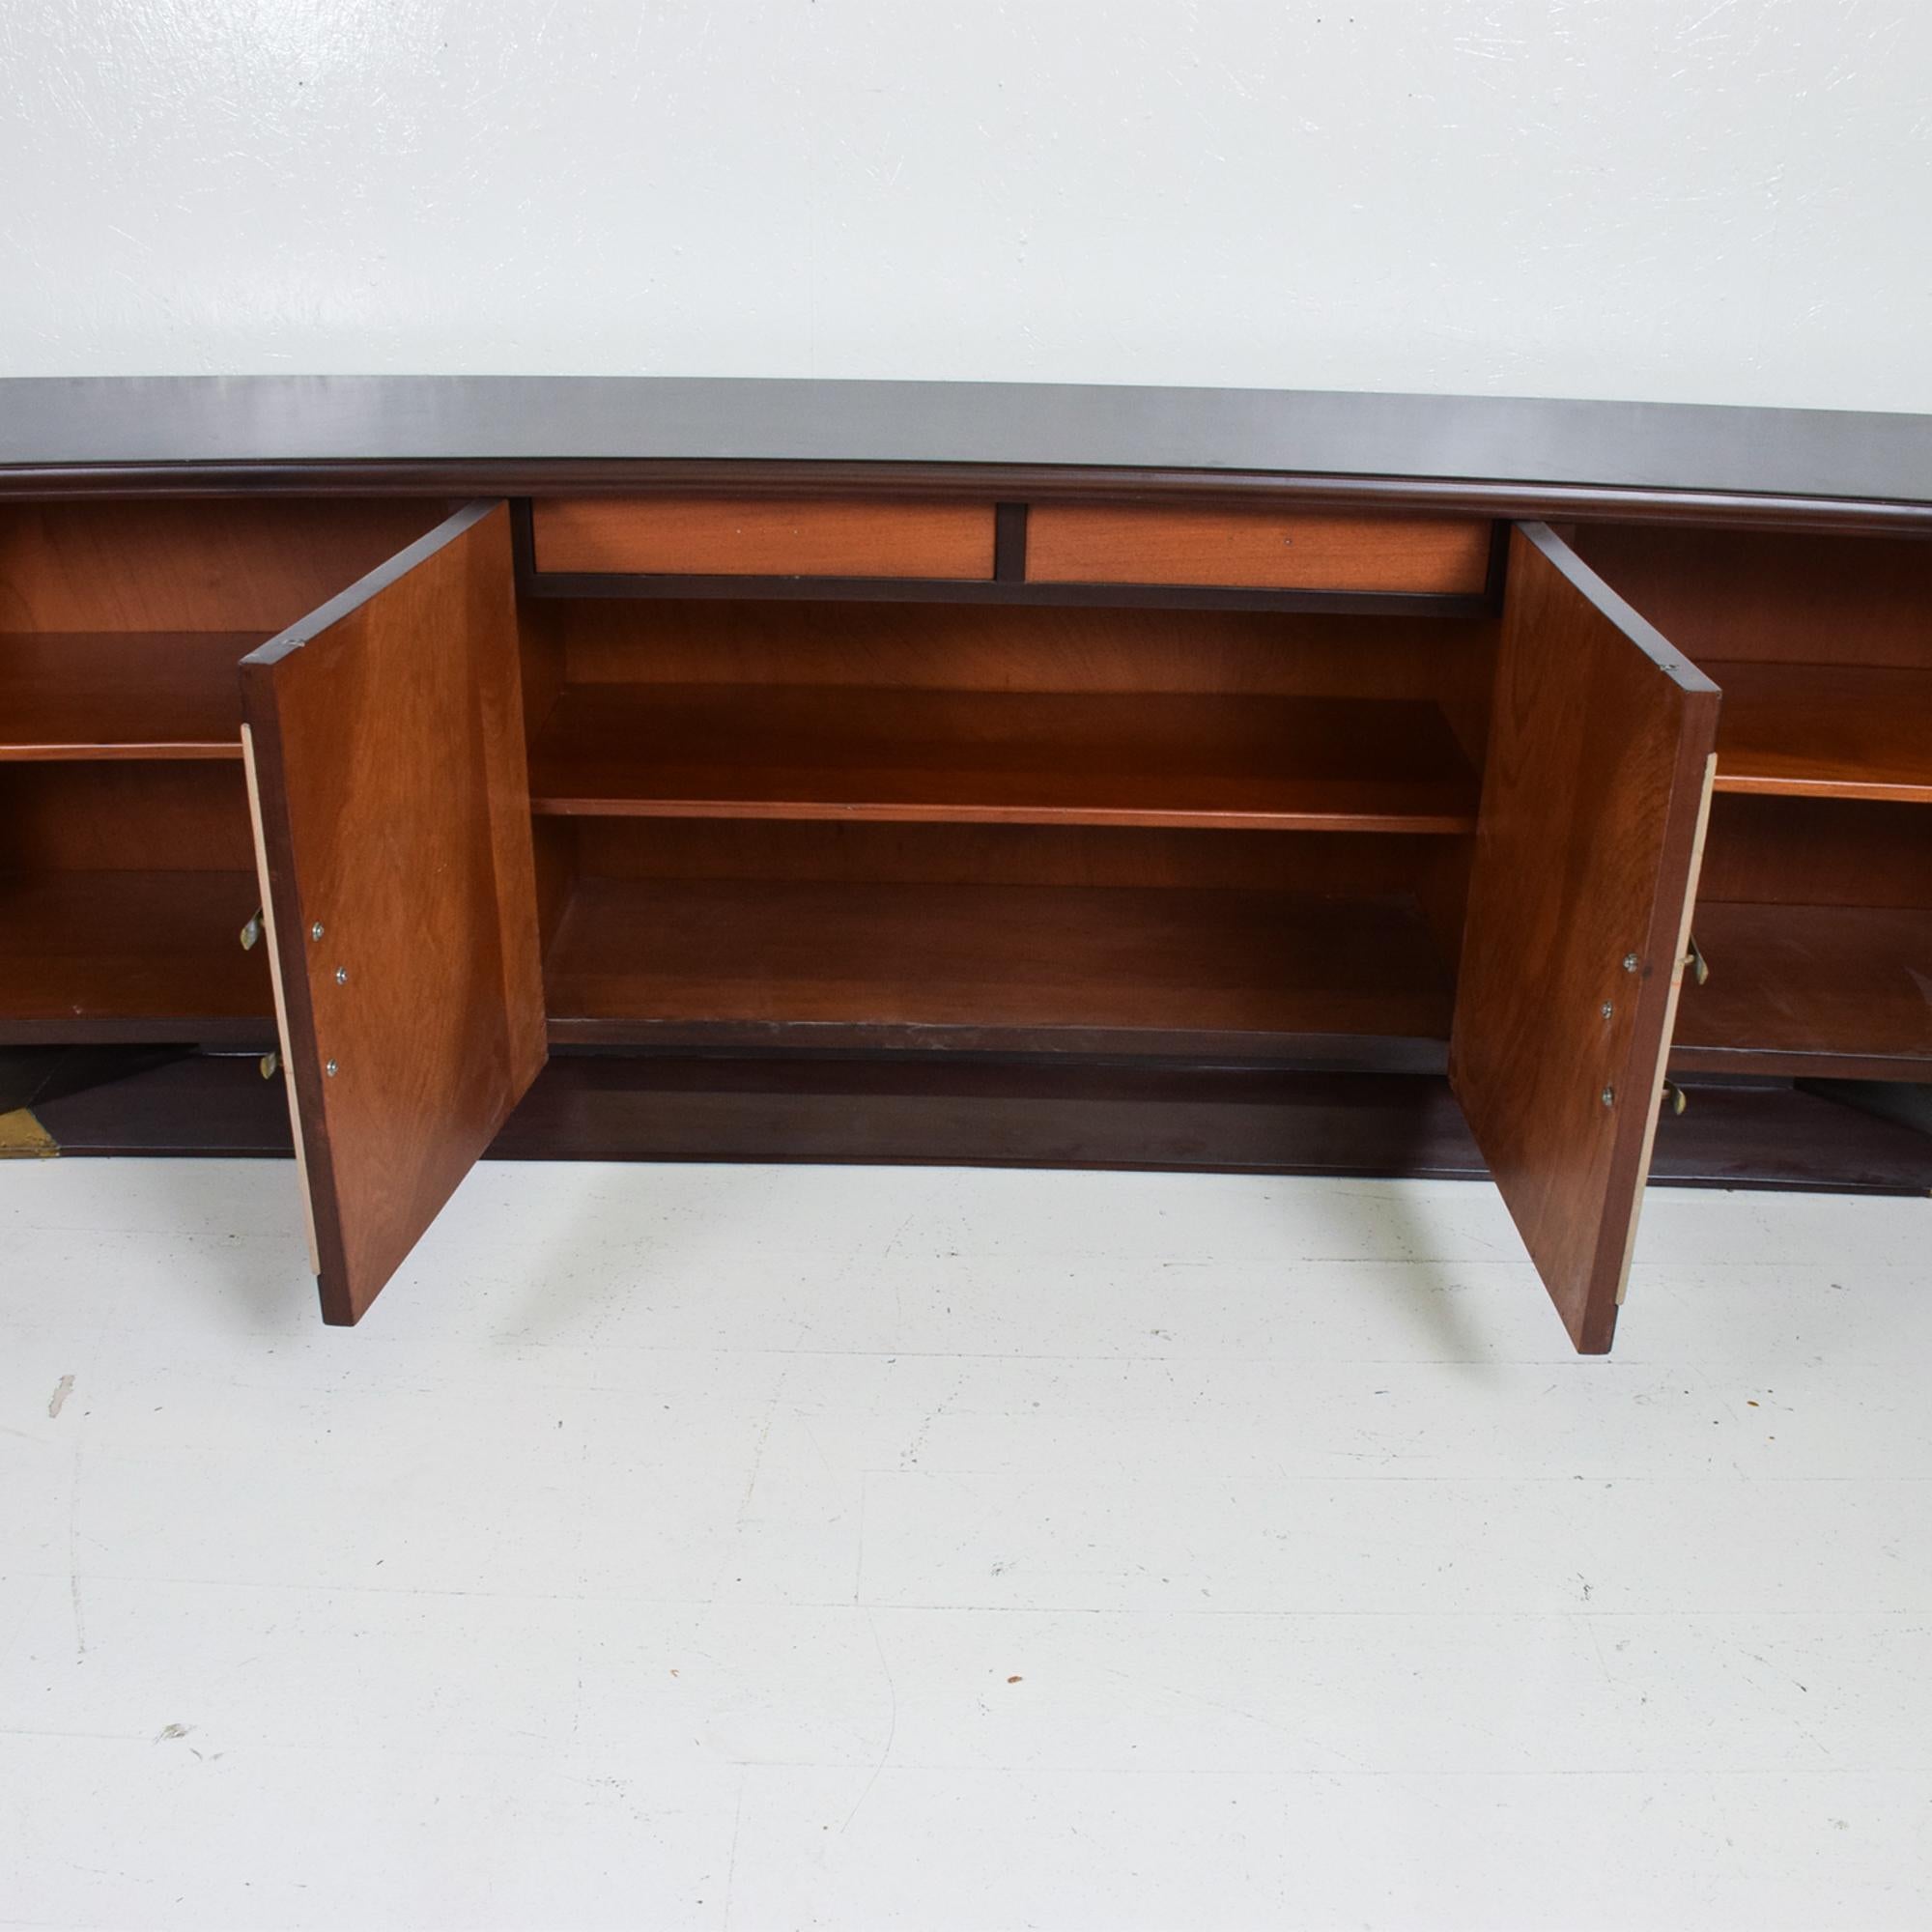 Midcentury Mexican modernist credenza attribution Arturo Pani. No maker mark present. Made in Mexico circa 1950s
Spectacularly sleek long credenza in rich Mahogany Wood. Two tone presentation. 
Center doors are covered in off-white leather.
Brass